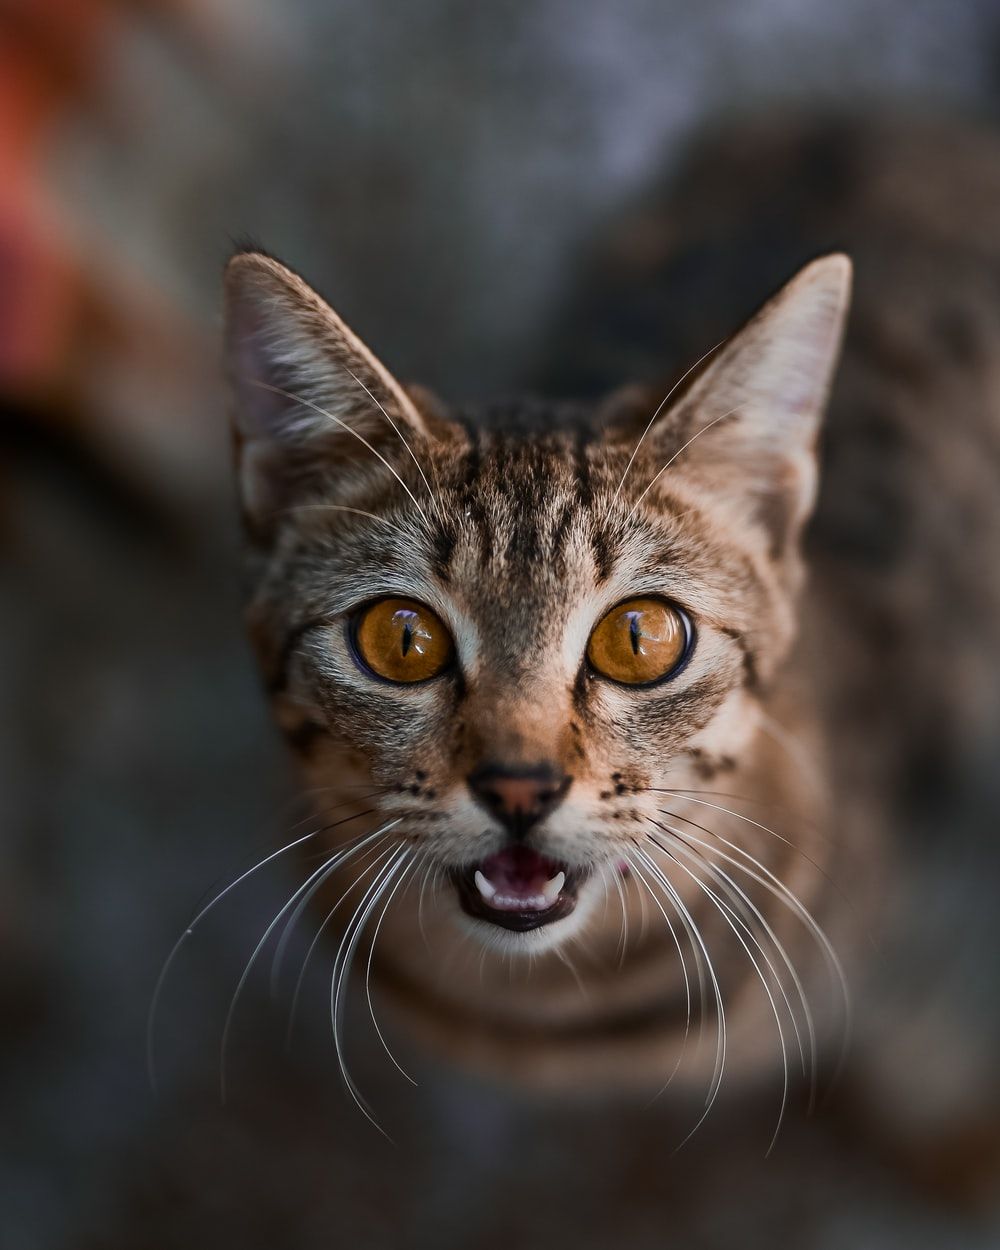 Cat Picture & Image [HD]. Download Free Image